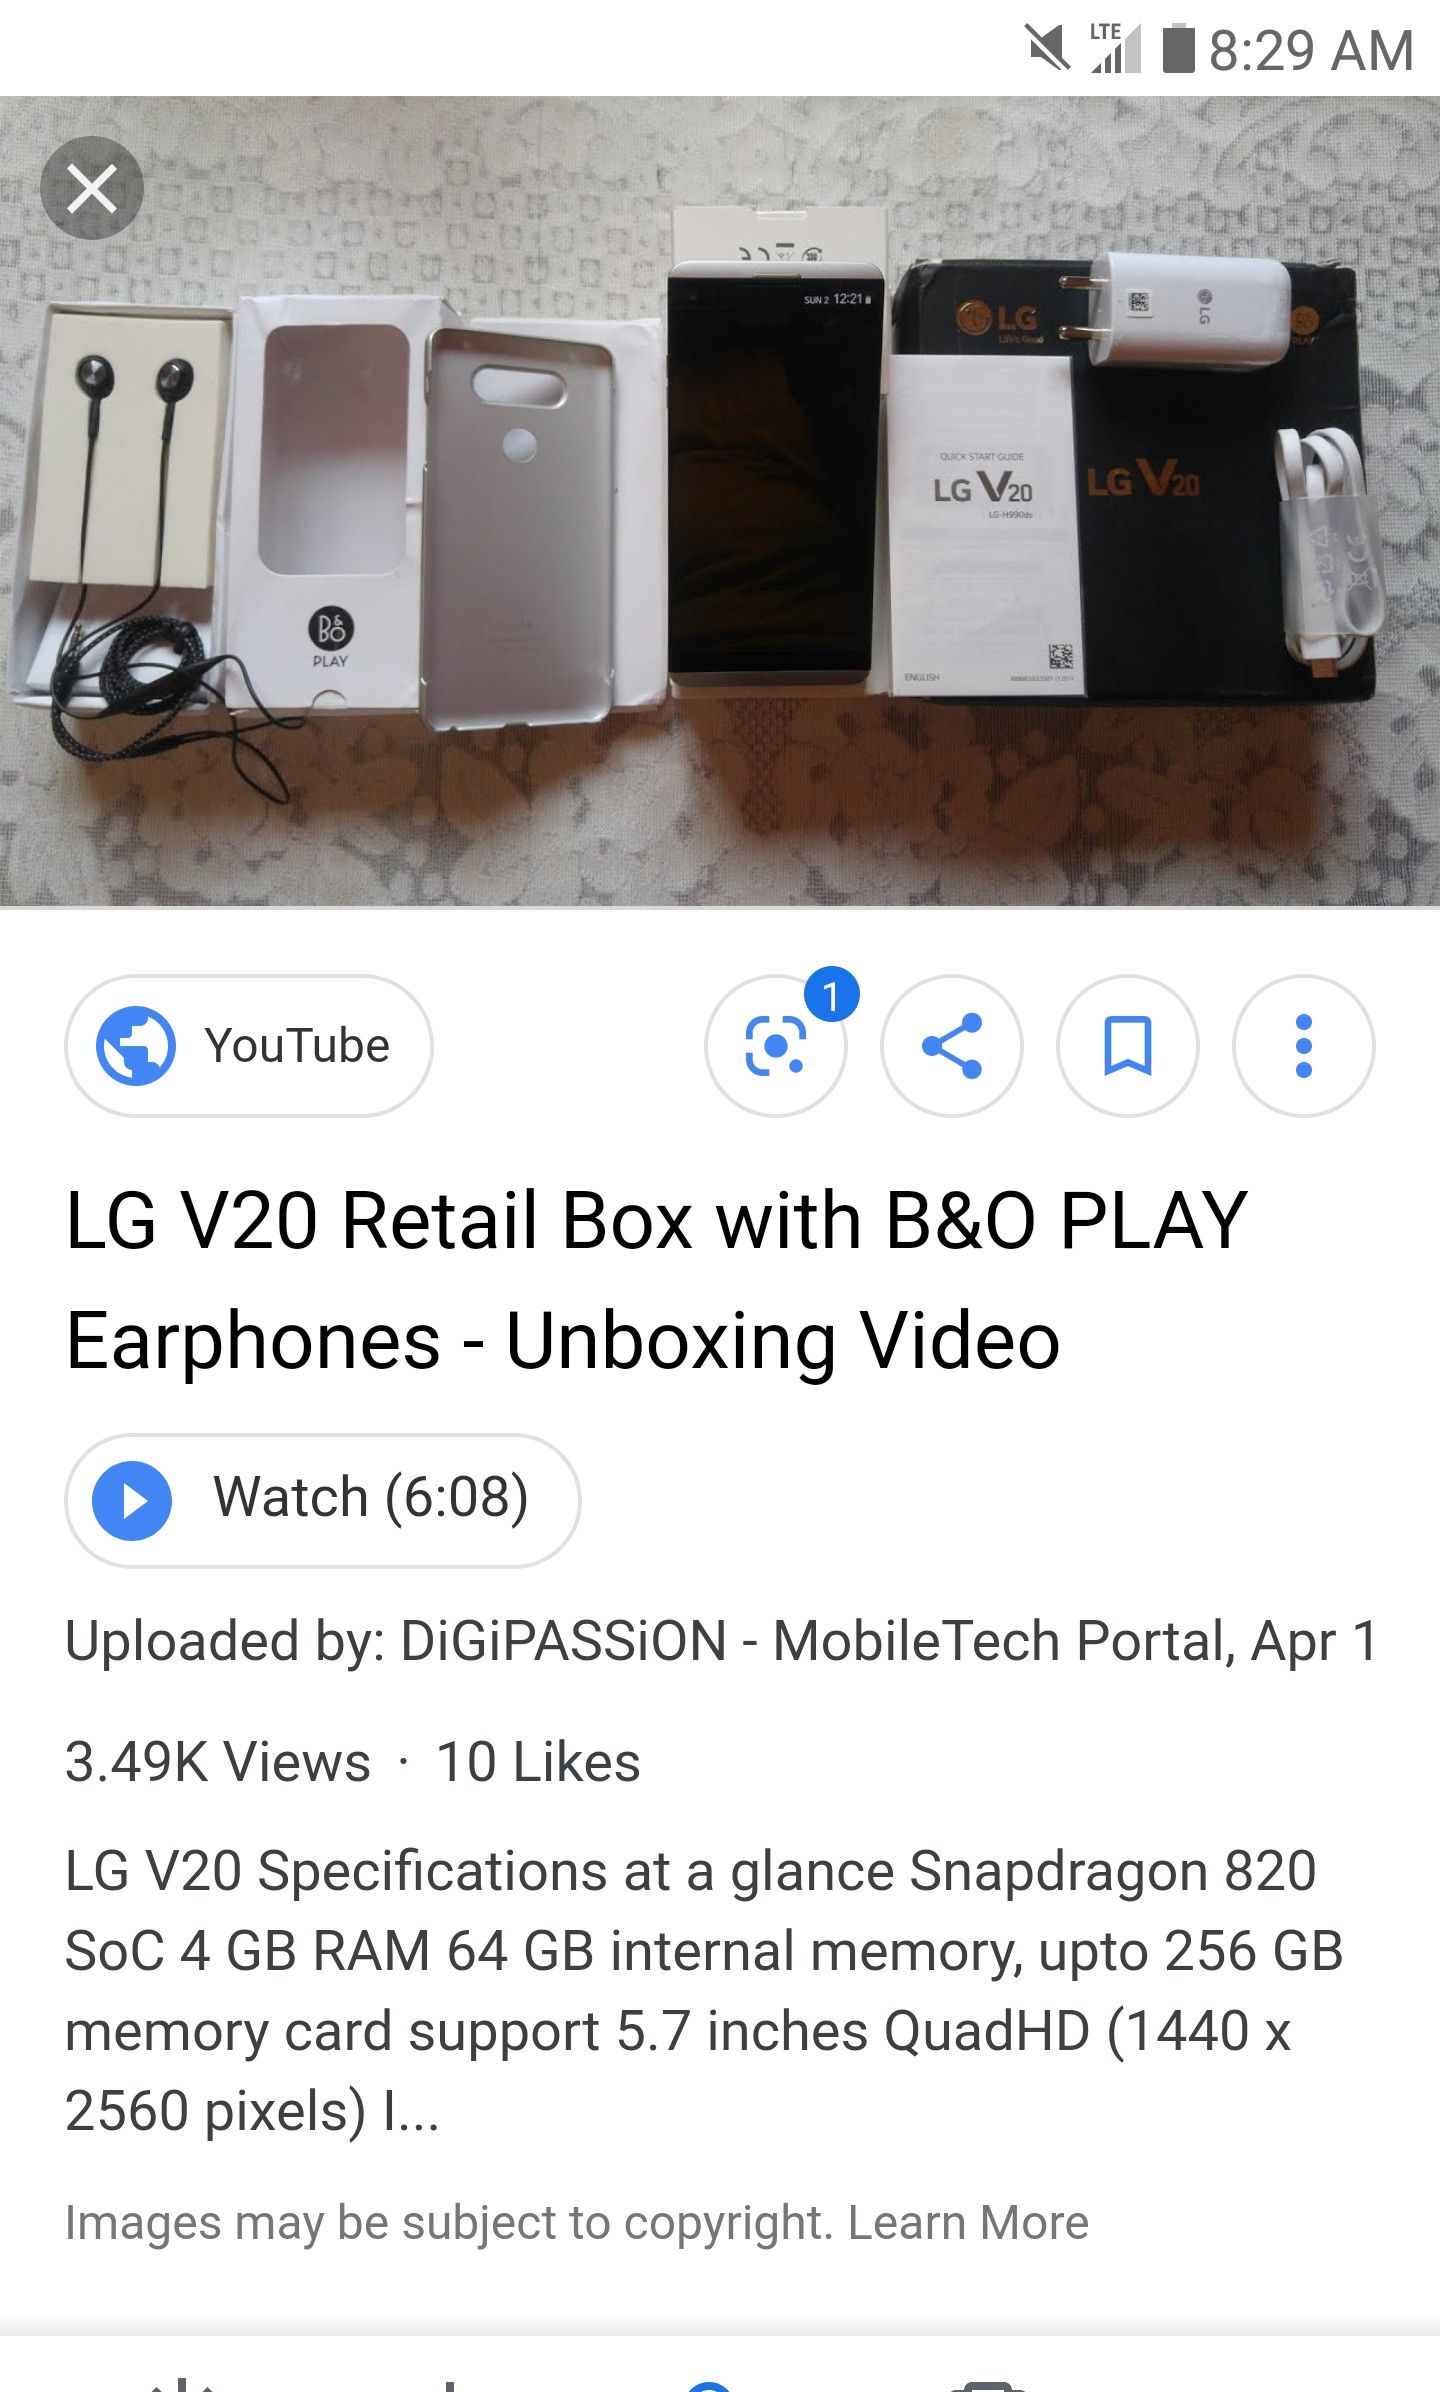 LG V20 64g phone complete with everything in like new condition.